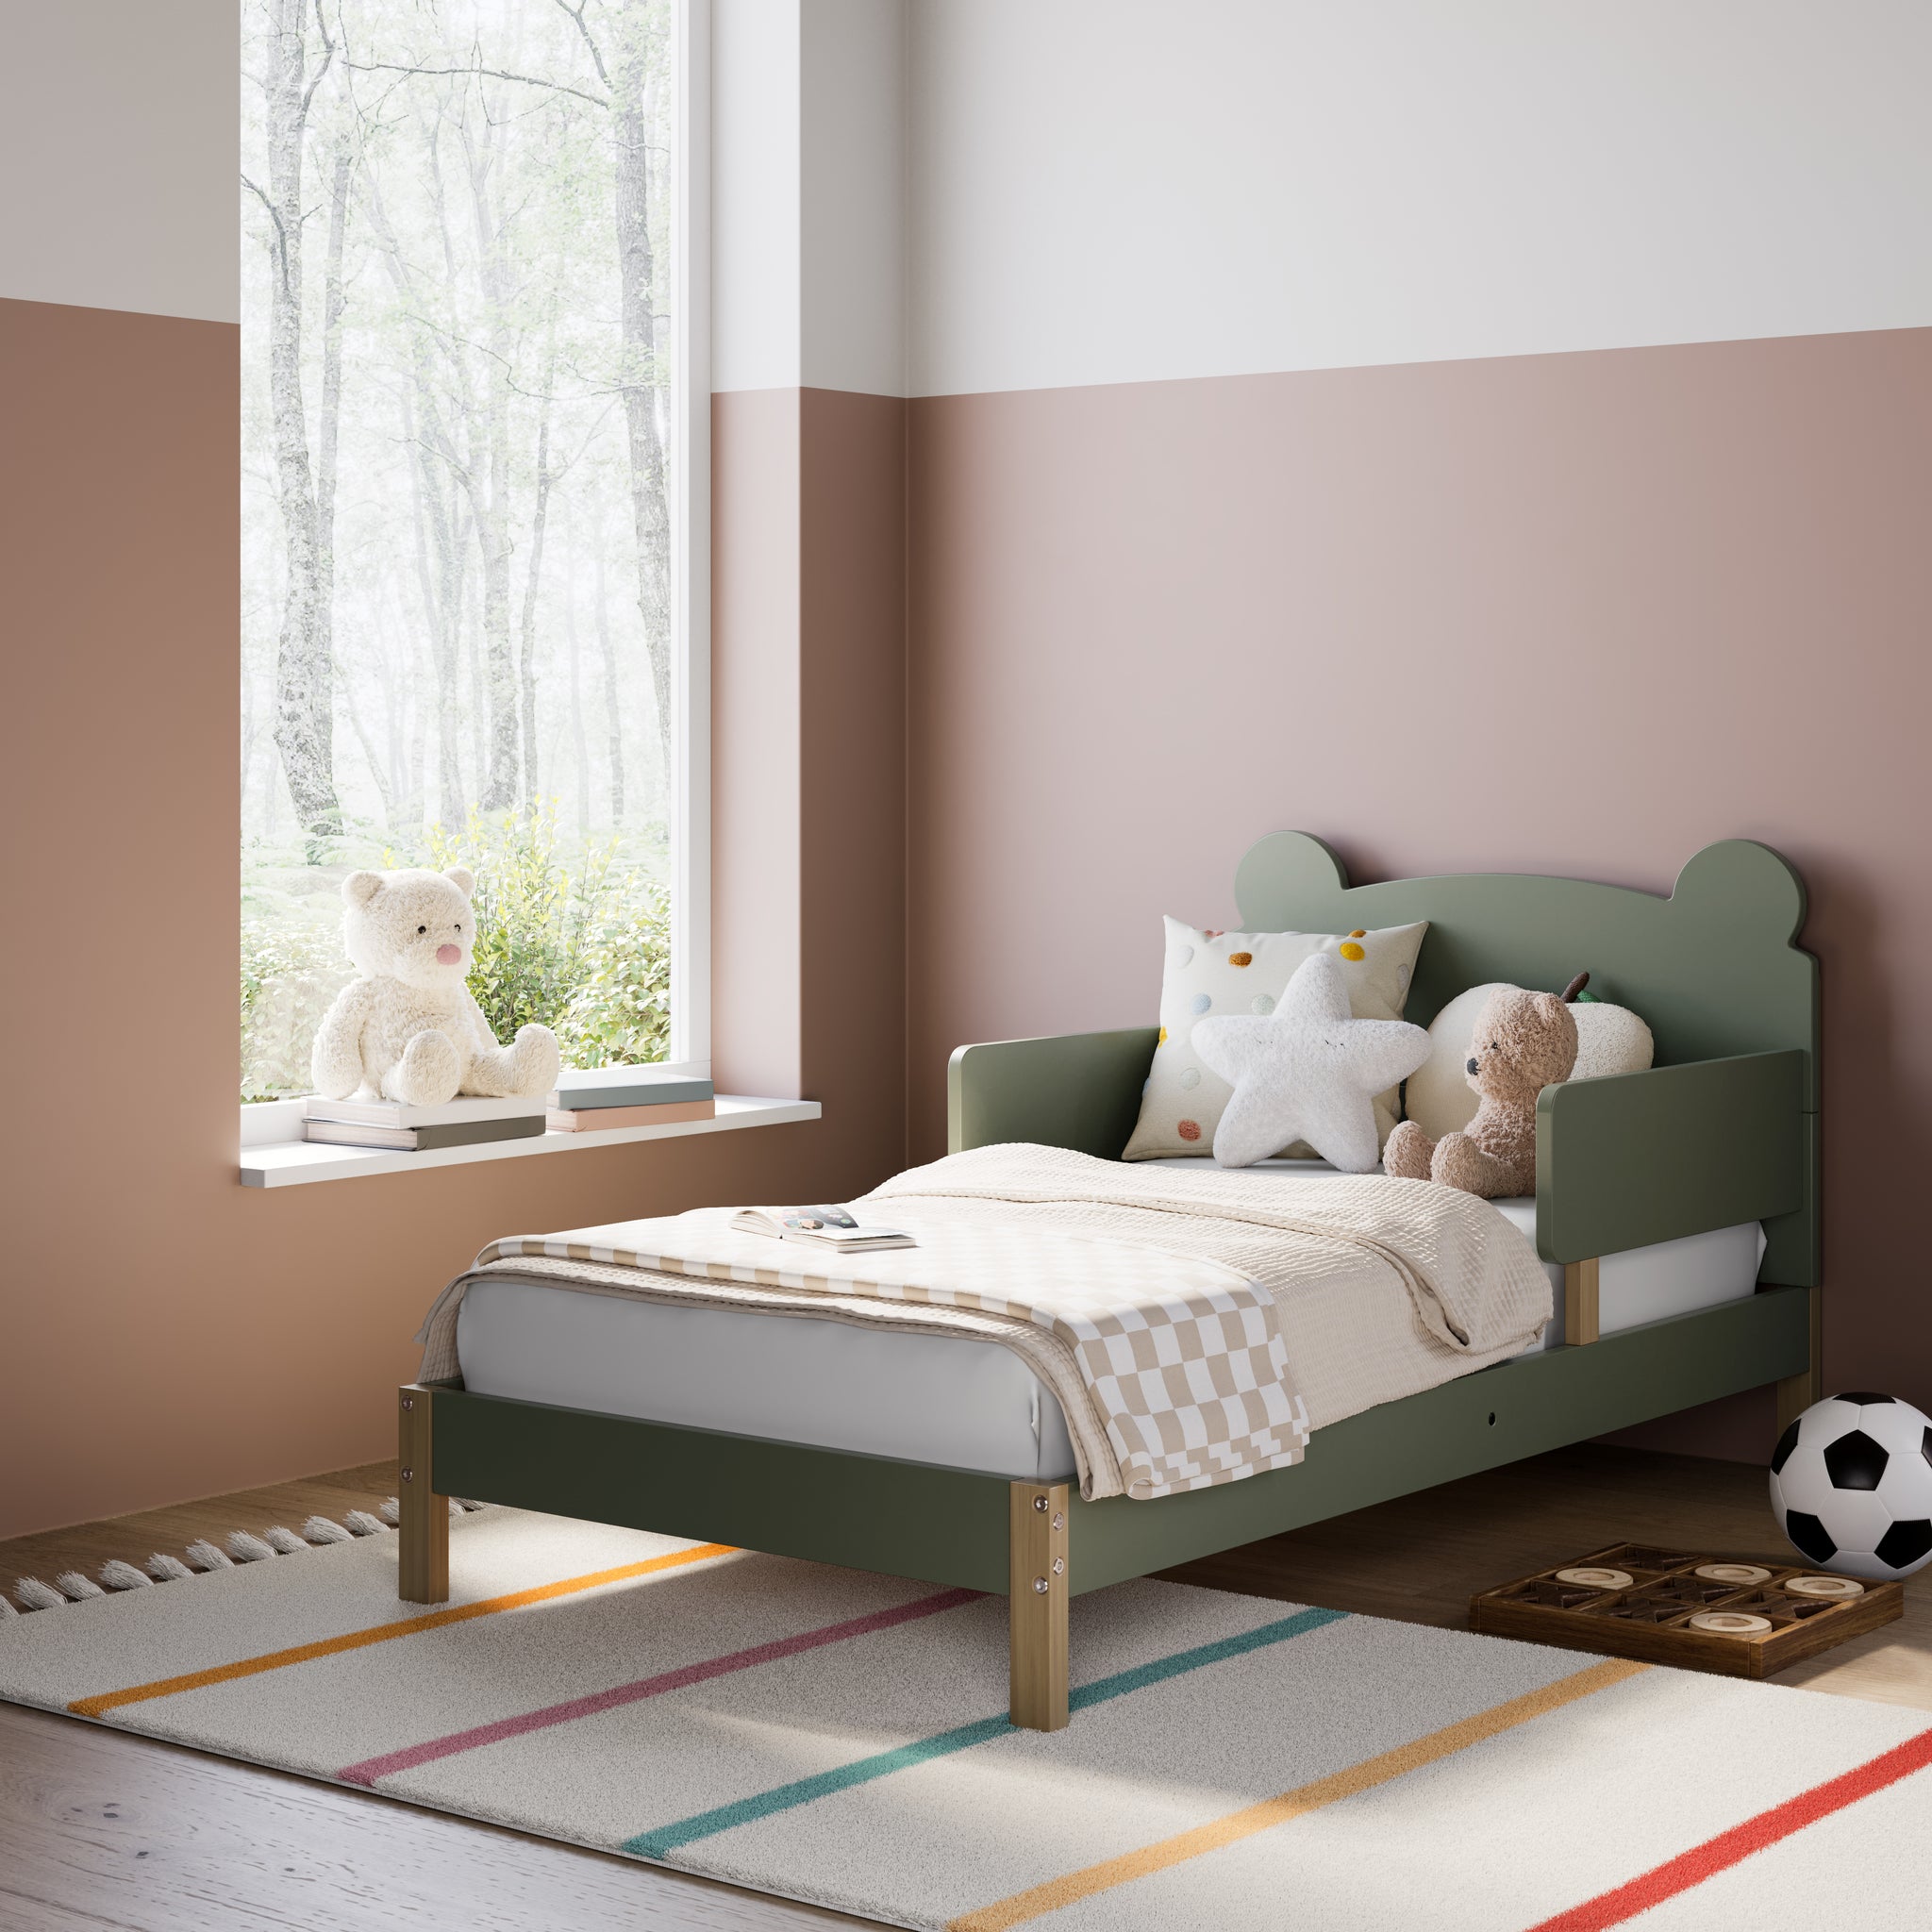 Olive-colored toddler bed in nursery